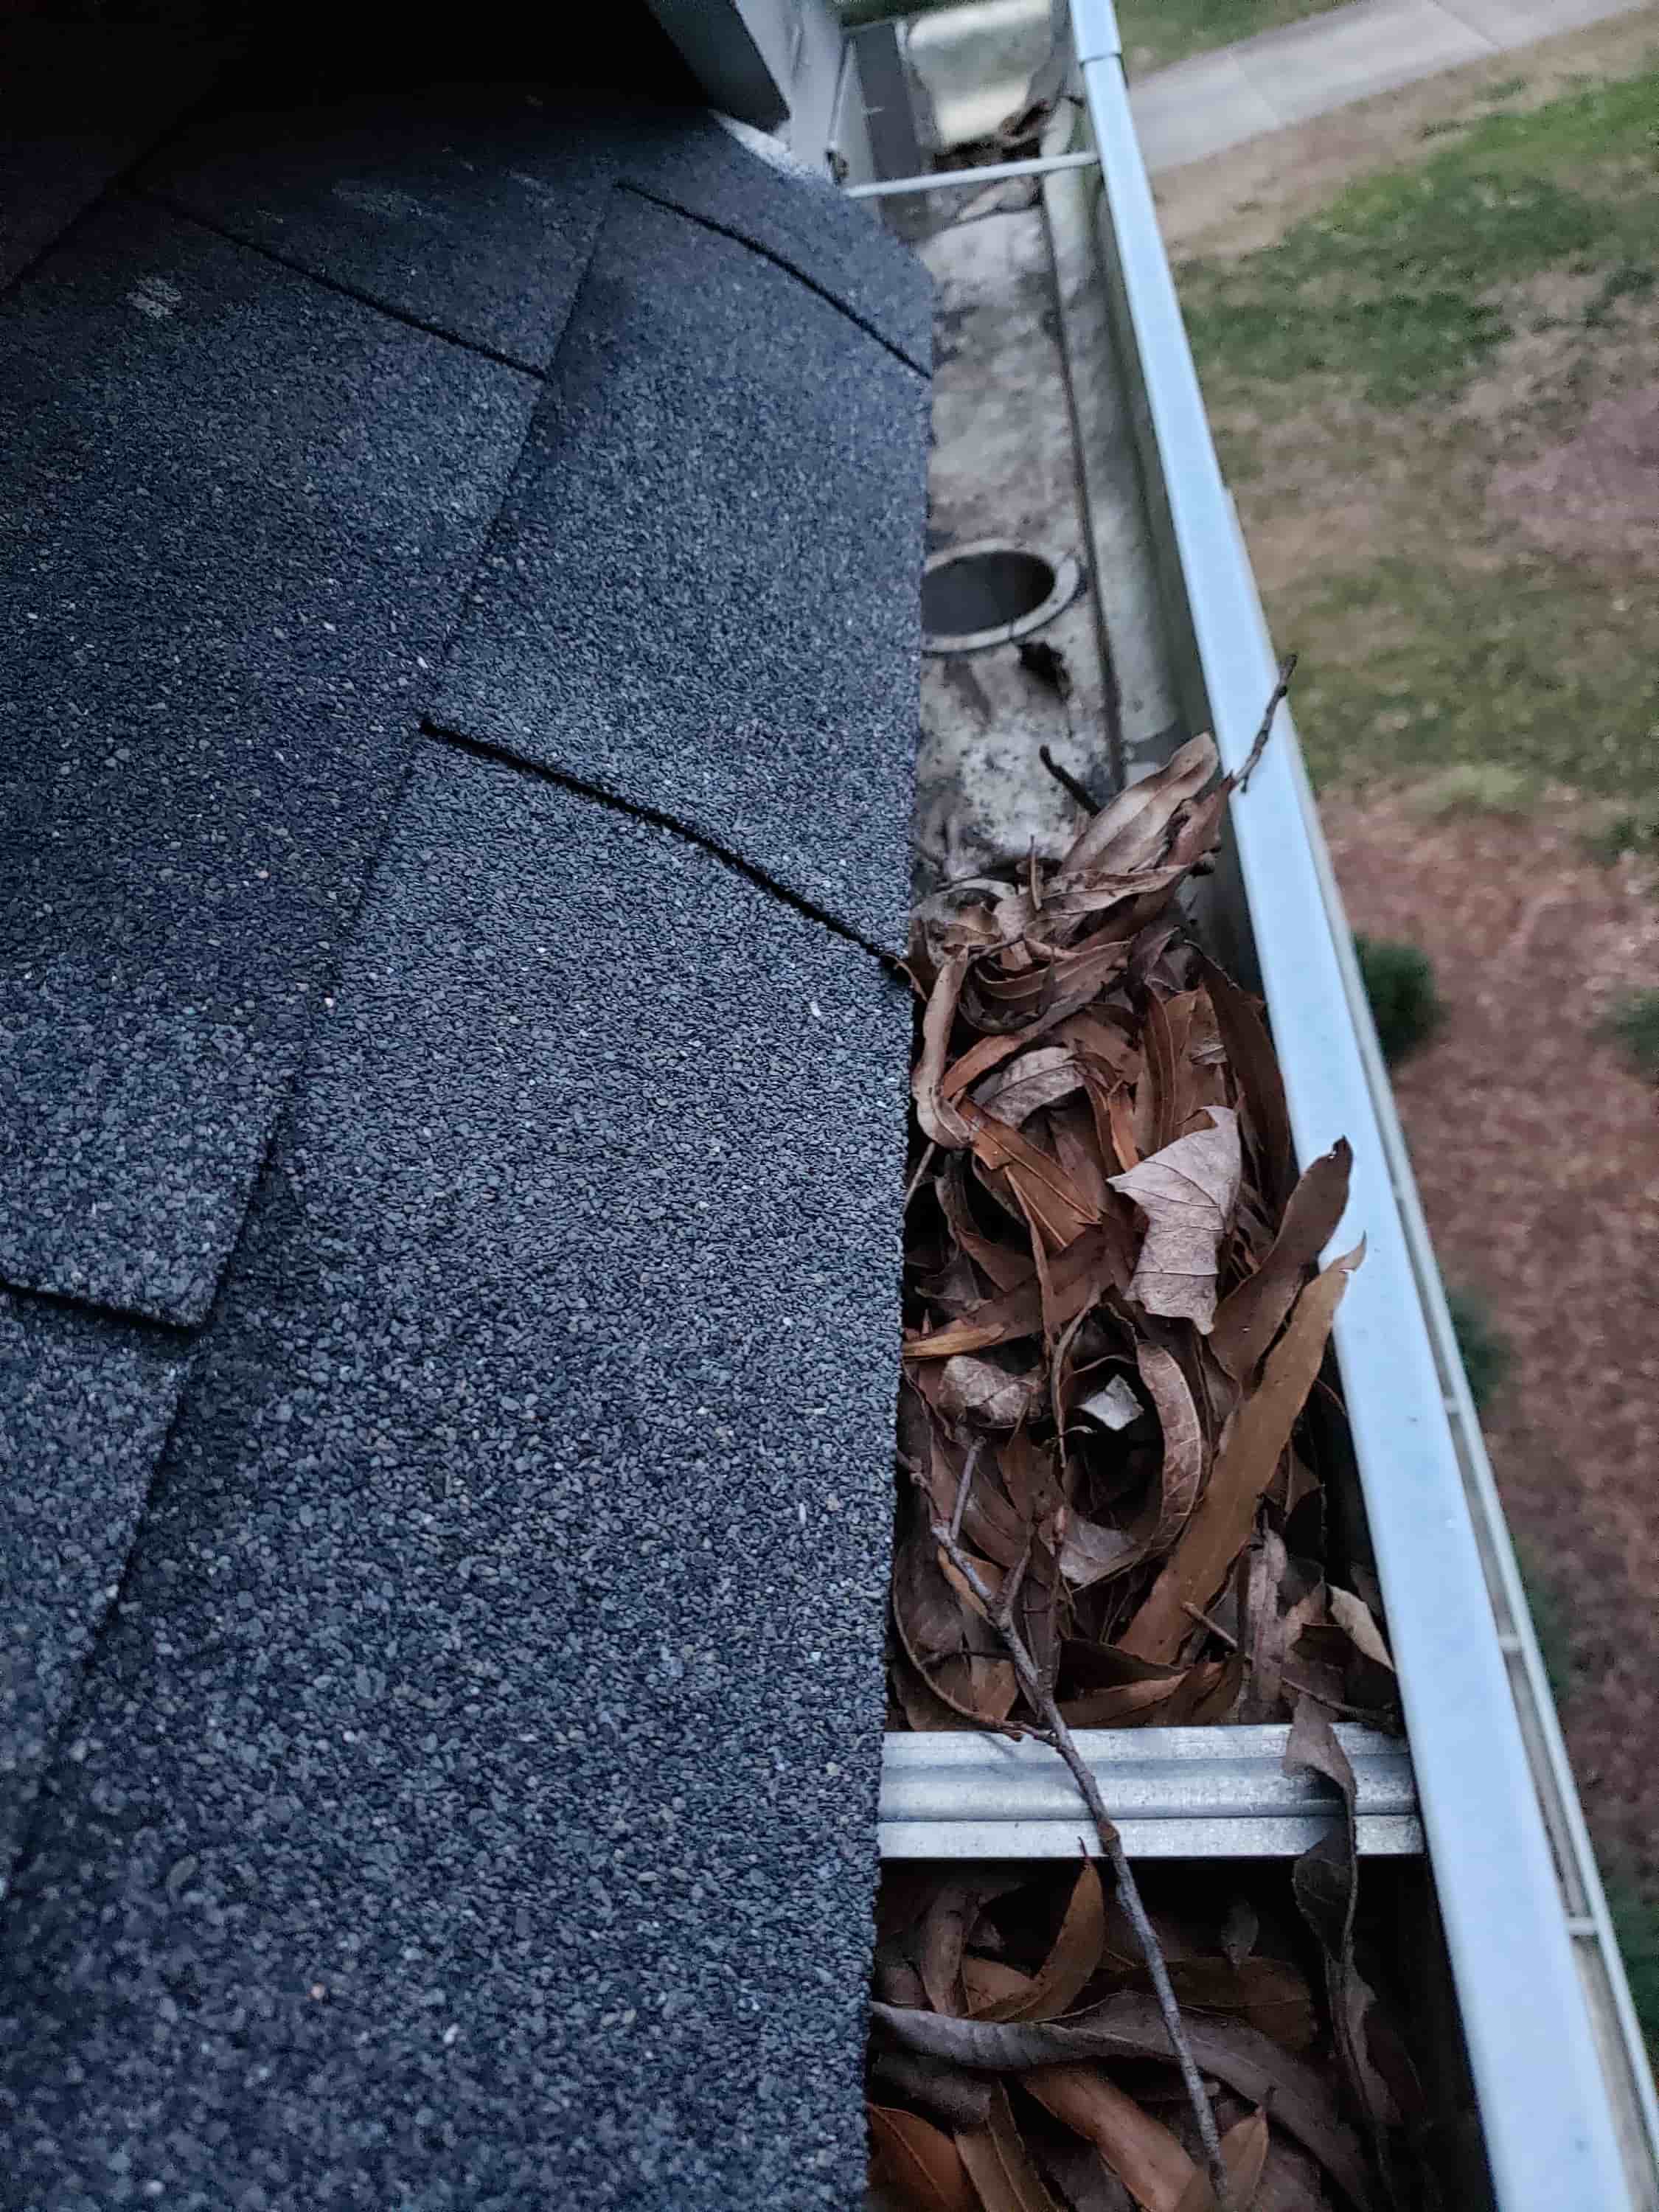 gutter cleaning with power washer